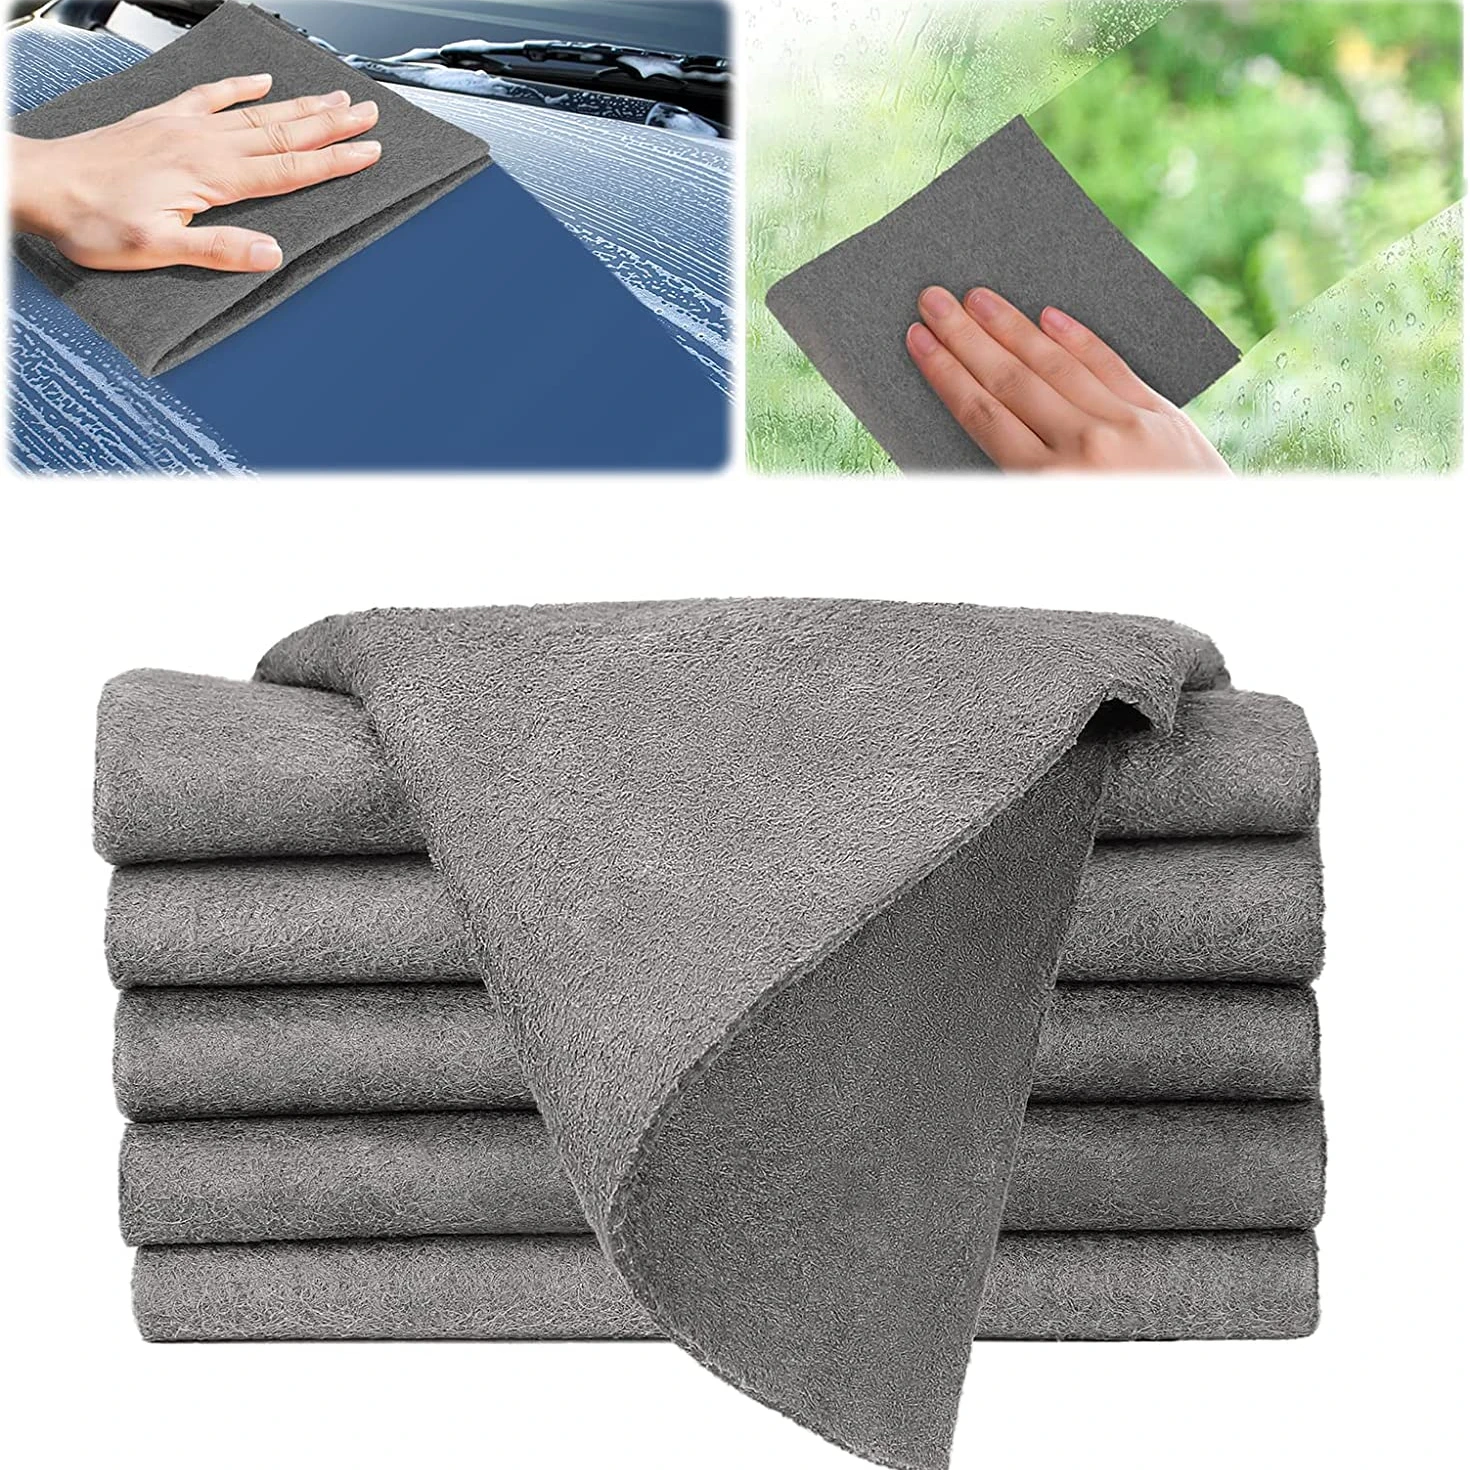 3/5 Pcs Thickened Magic Cleaning Cloth Magic Streak Free Microfiber Cloth Reusable Glass Cleaning Rag for Kitchens Glass Cars